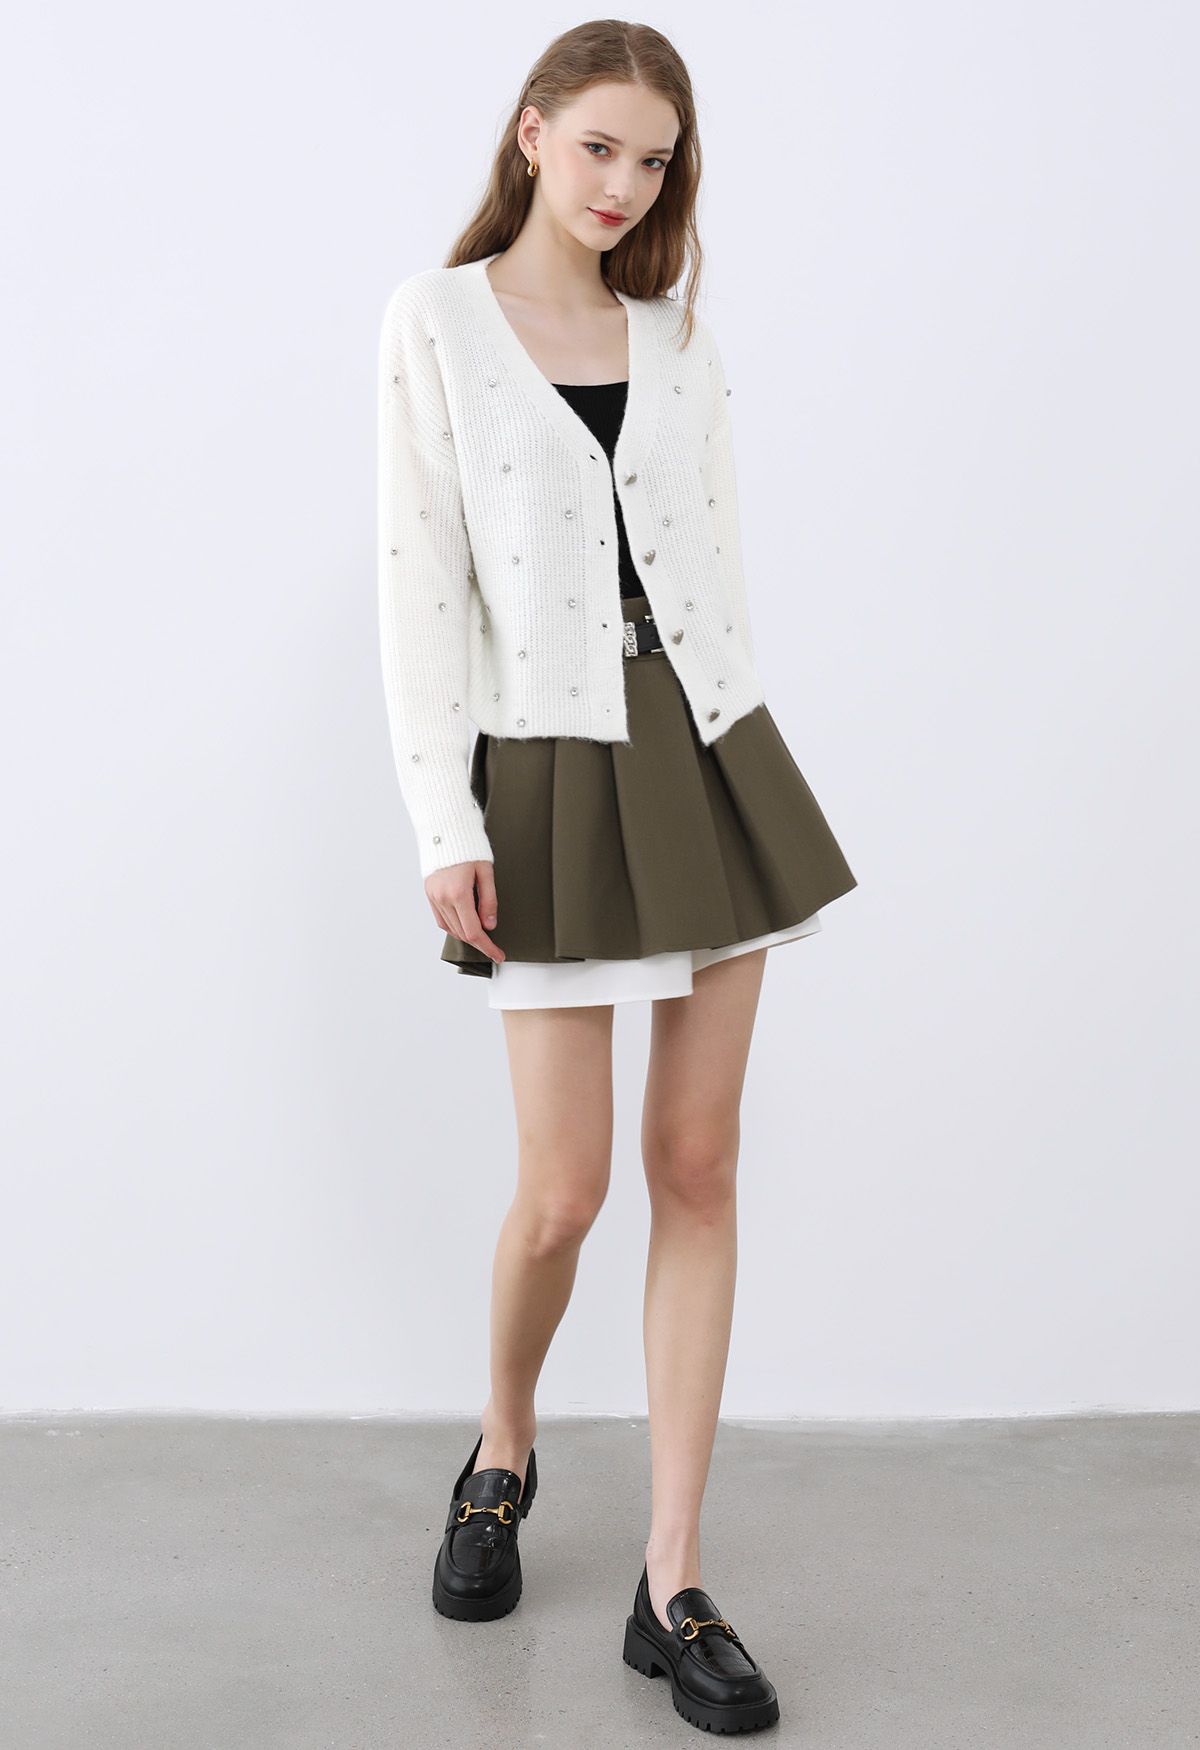 Rhinestone Embellished Button Down Knit Cardigan in Ivory